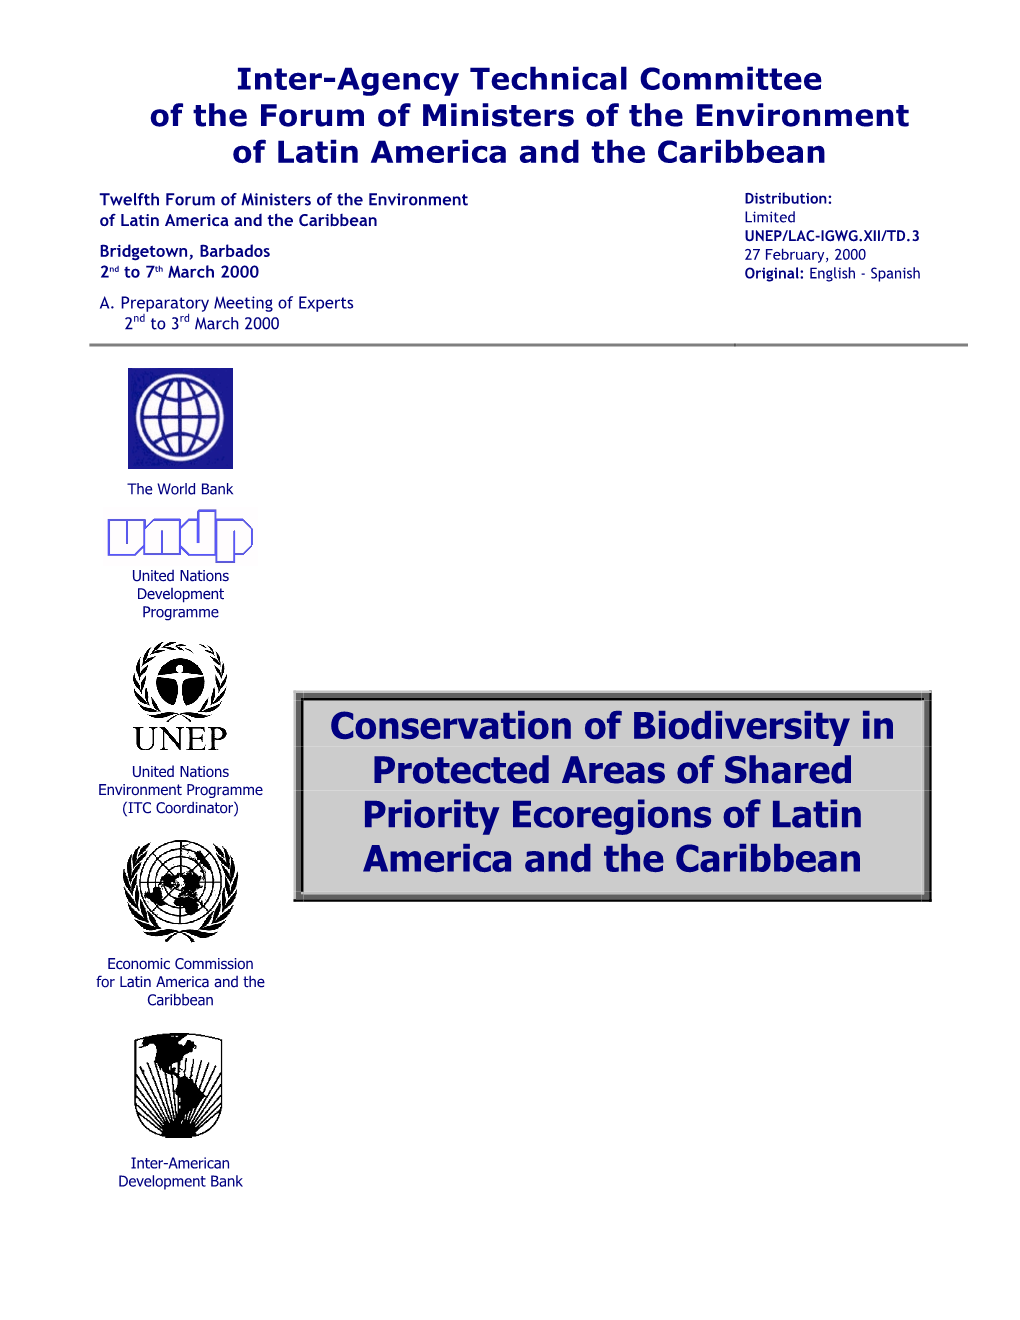 Conservation of Biodiversity in Protected Areas of Shared Priority Ecoregions of Latin America and the Caribbean